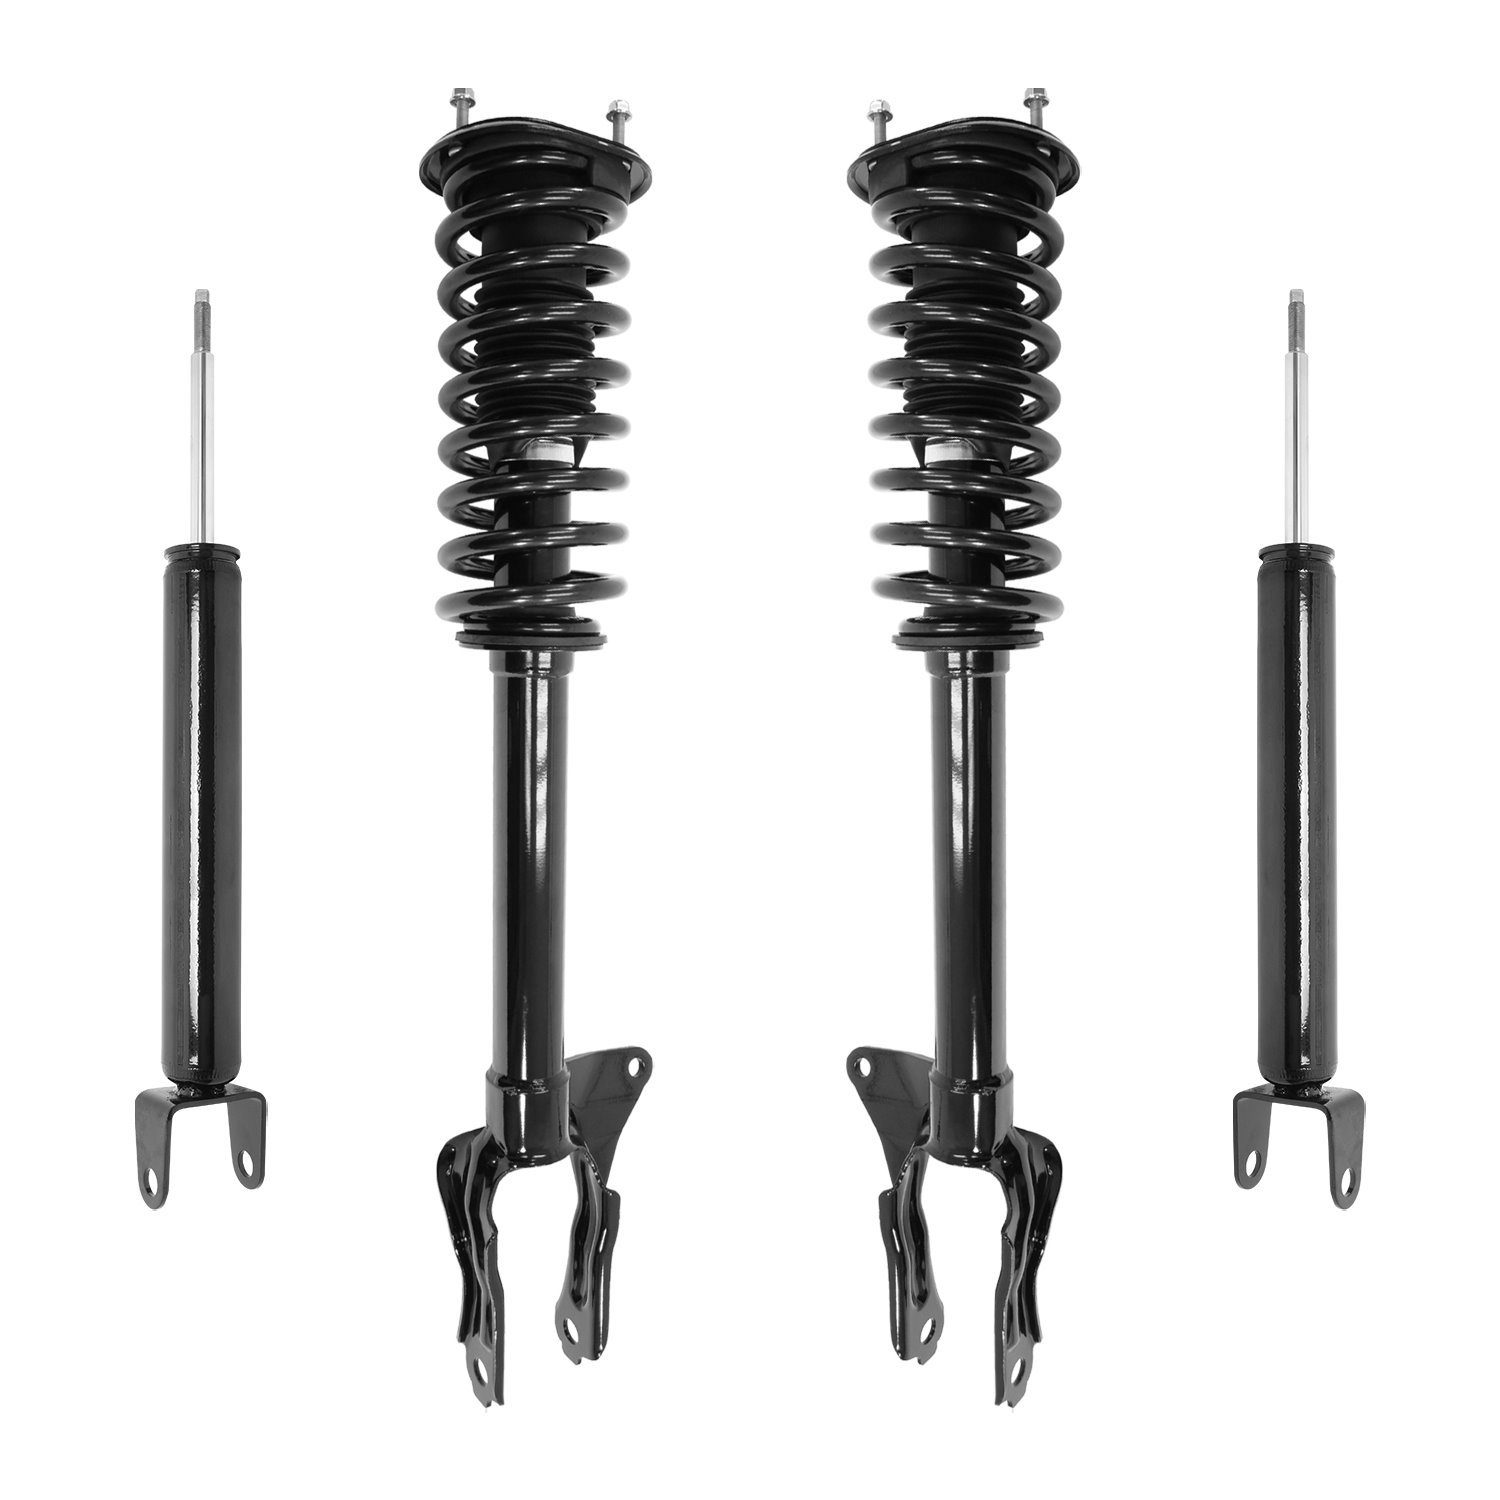 4-11225-256500-001 Front & Rear Suspension Strut & Coil Spring Assembly Fits Select Jeep Grand Cherokee